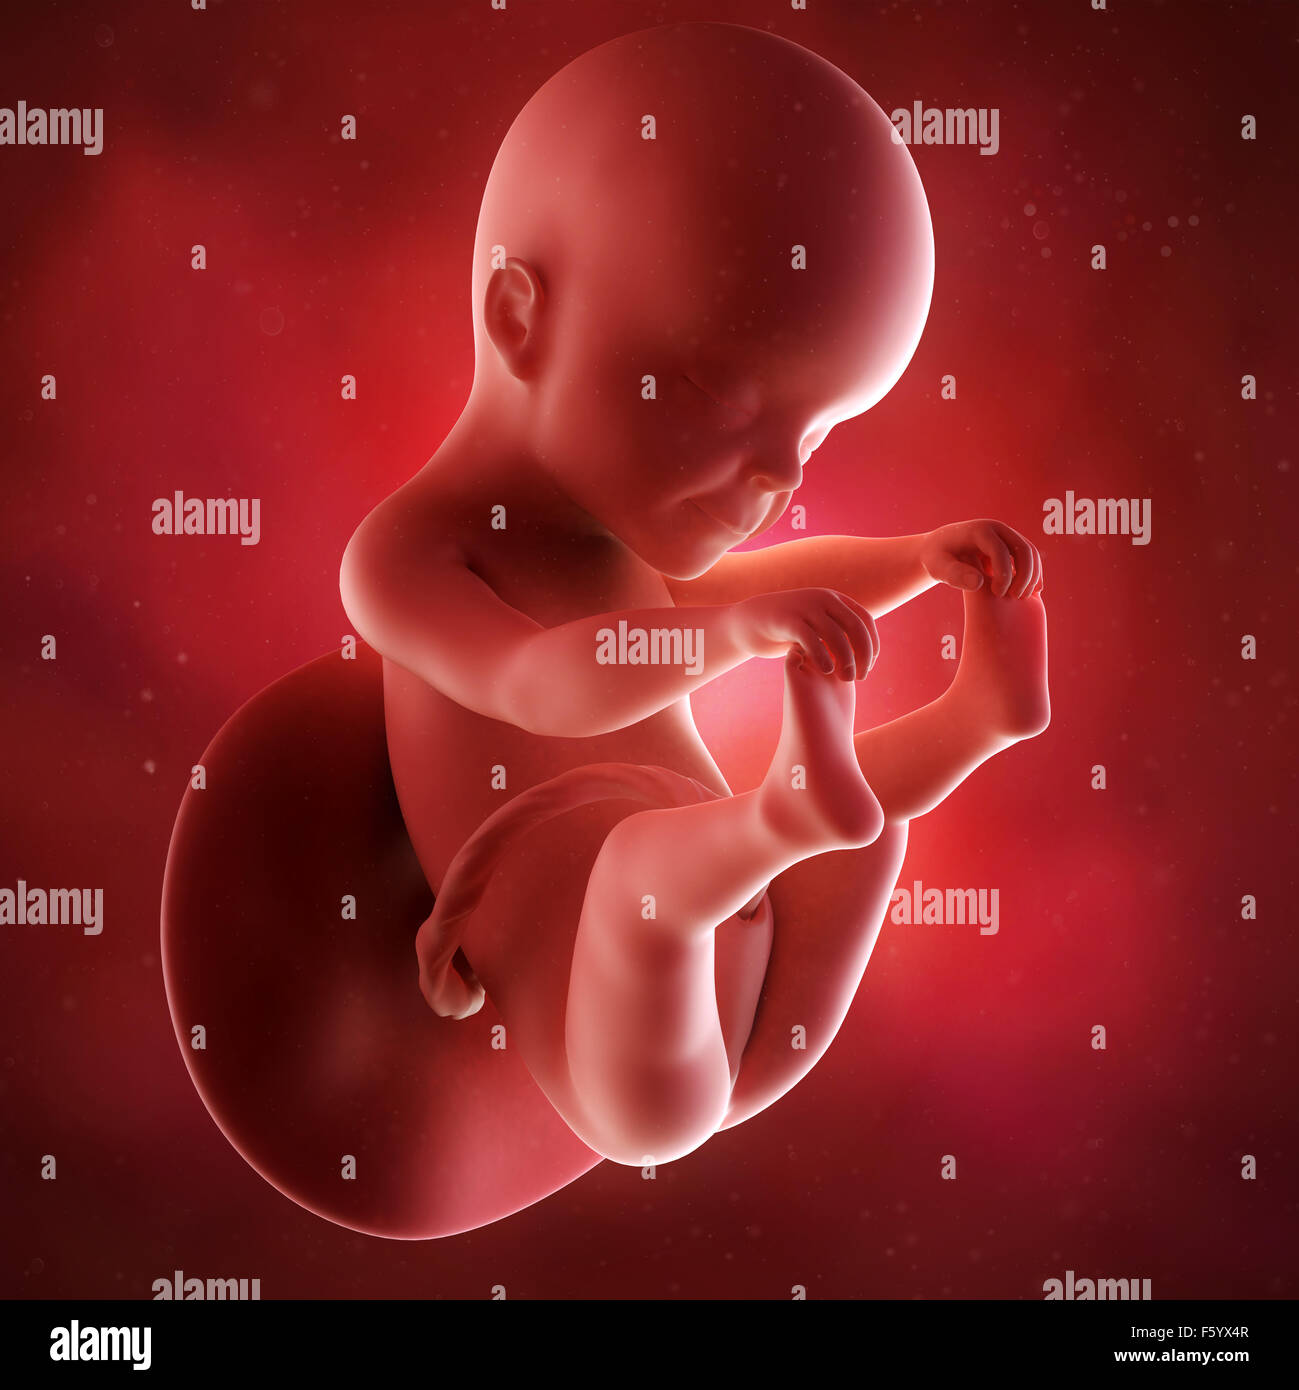 medical accurate 3d illustration of a fetus week 25 Stock Photo